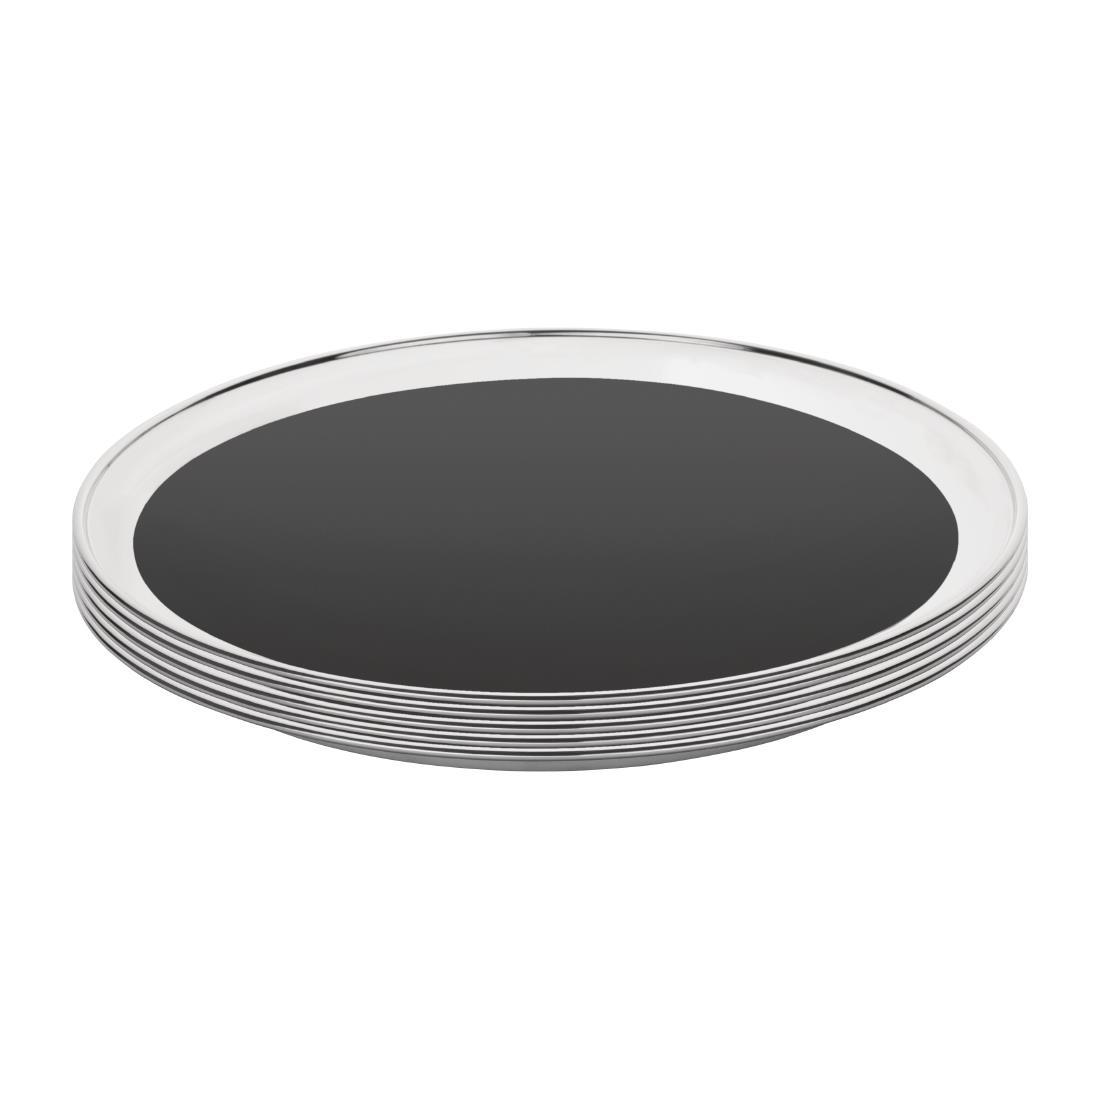 Olympia Stainless Steel Round Non-Slip Bar Tray 305mm - DP207  - 3